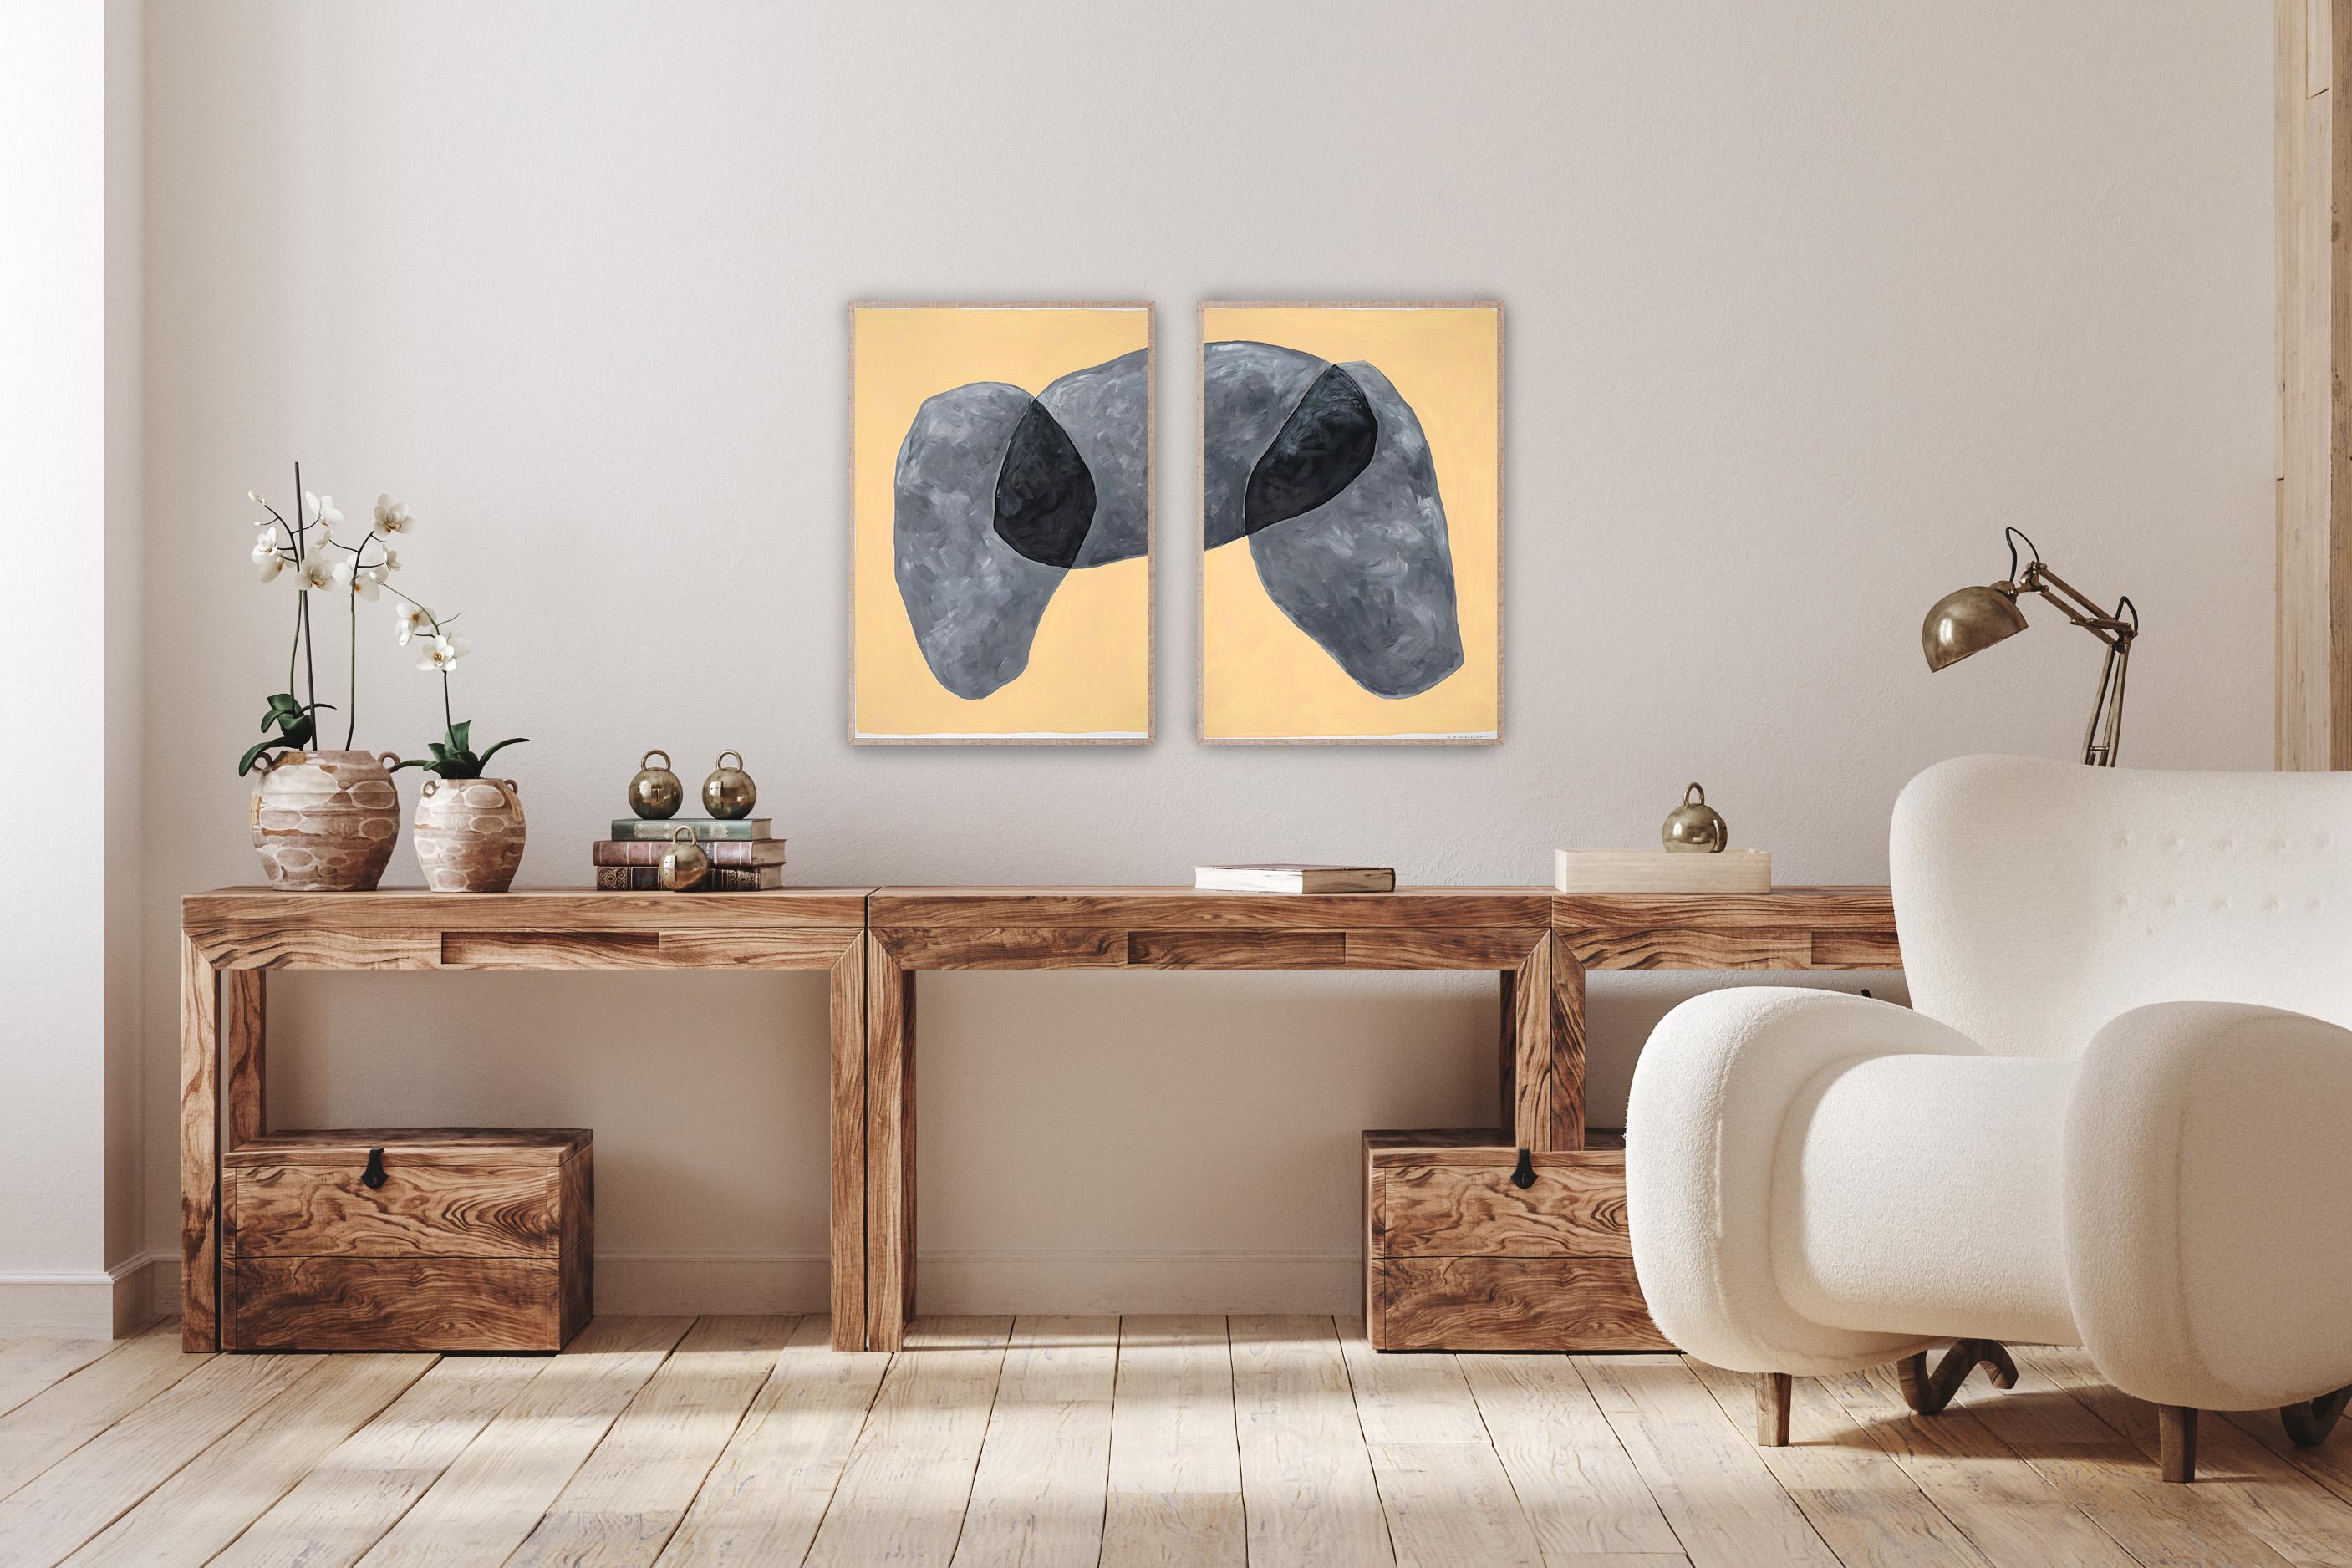 Dolmen Boulders, Abstract Diptych on Gray Tones, Tan Background, Geology Shapes - Painting by Ryan Rivadeneyra